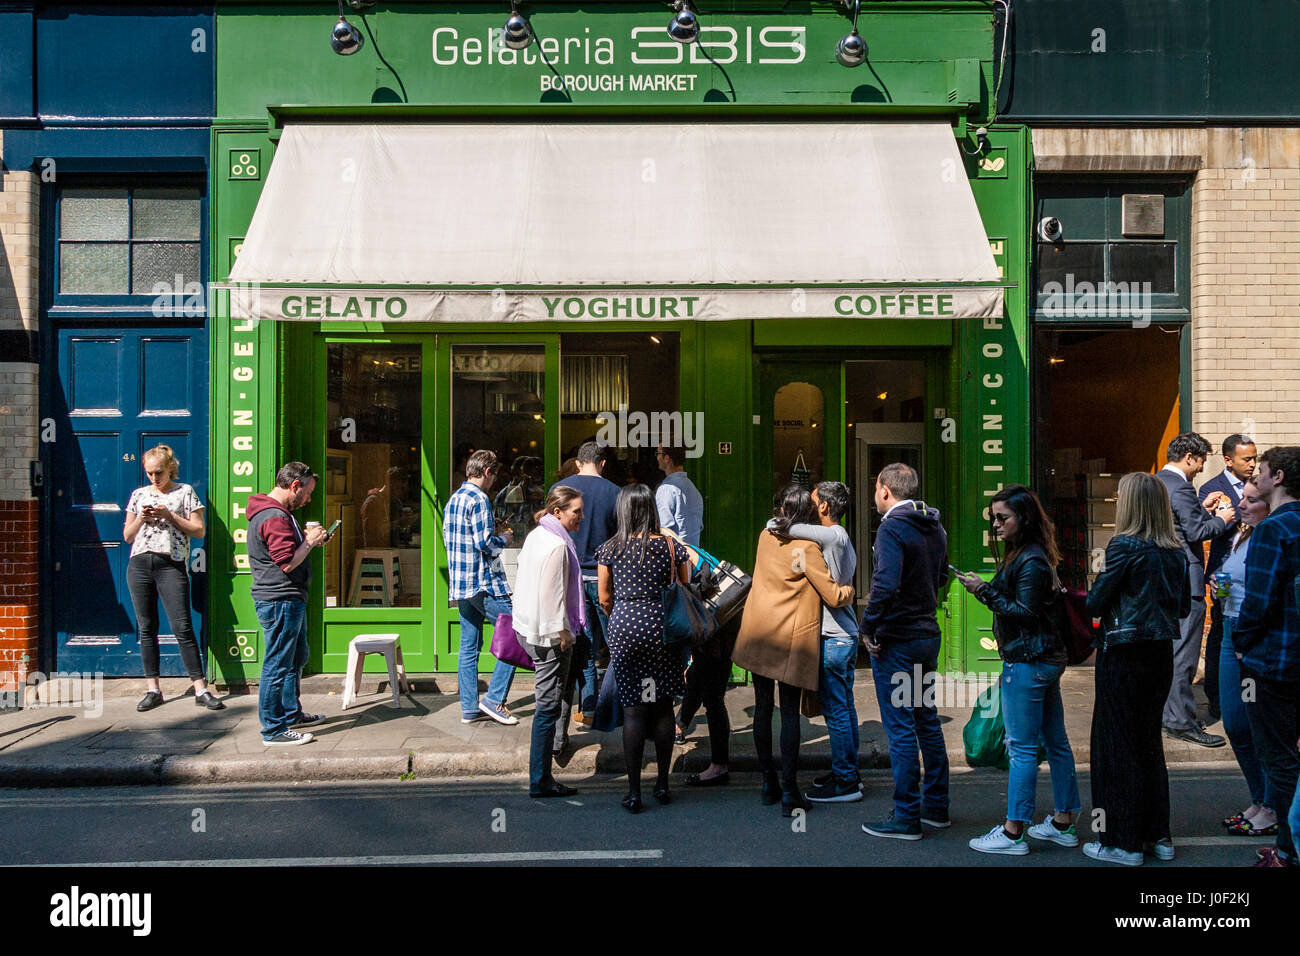 People Queueing At The 3BIS Gelateria Near Borough Market During Lunch Time, Southwark, London, England Stock Photo